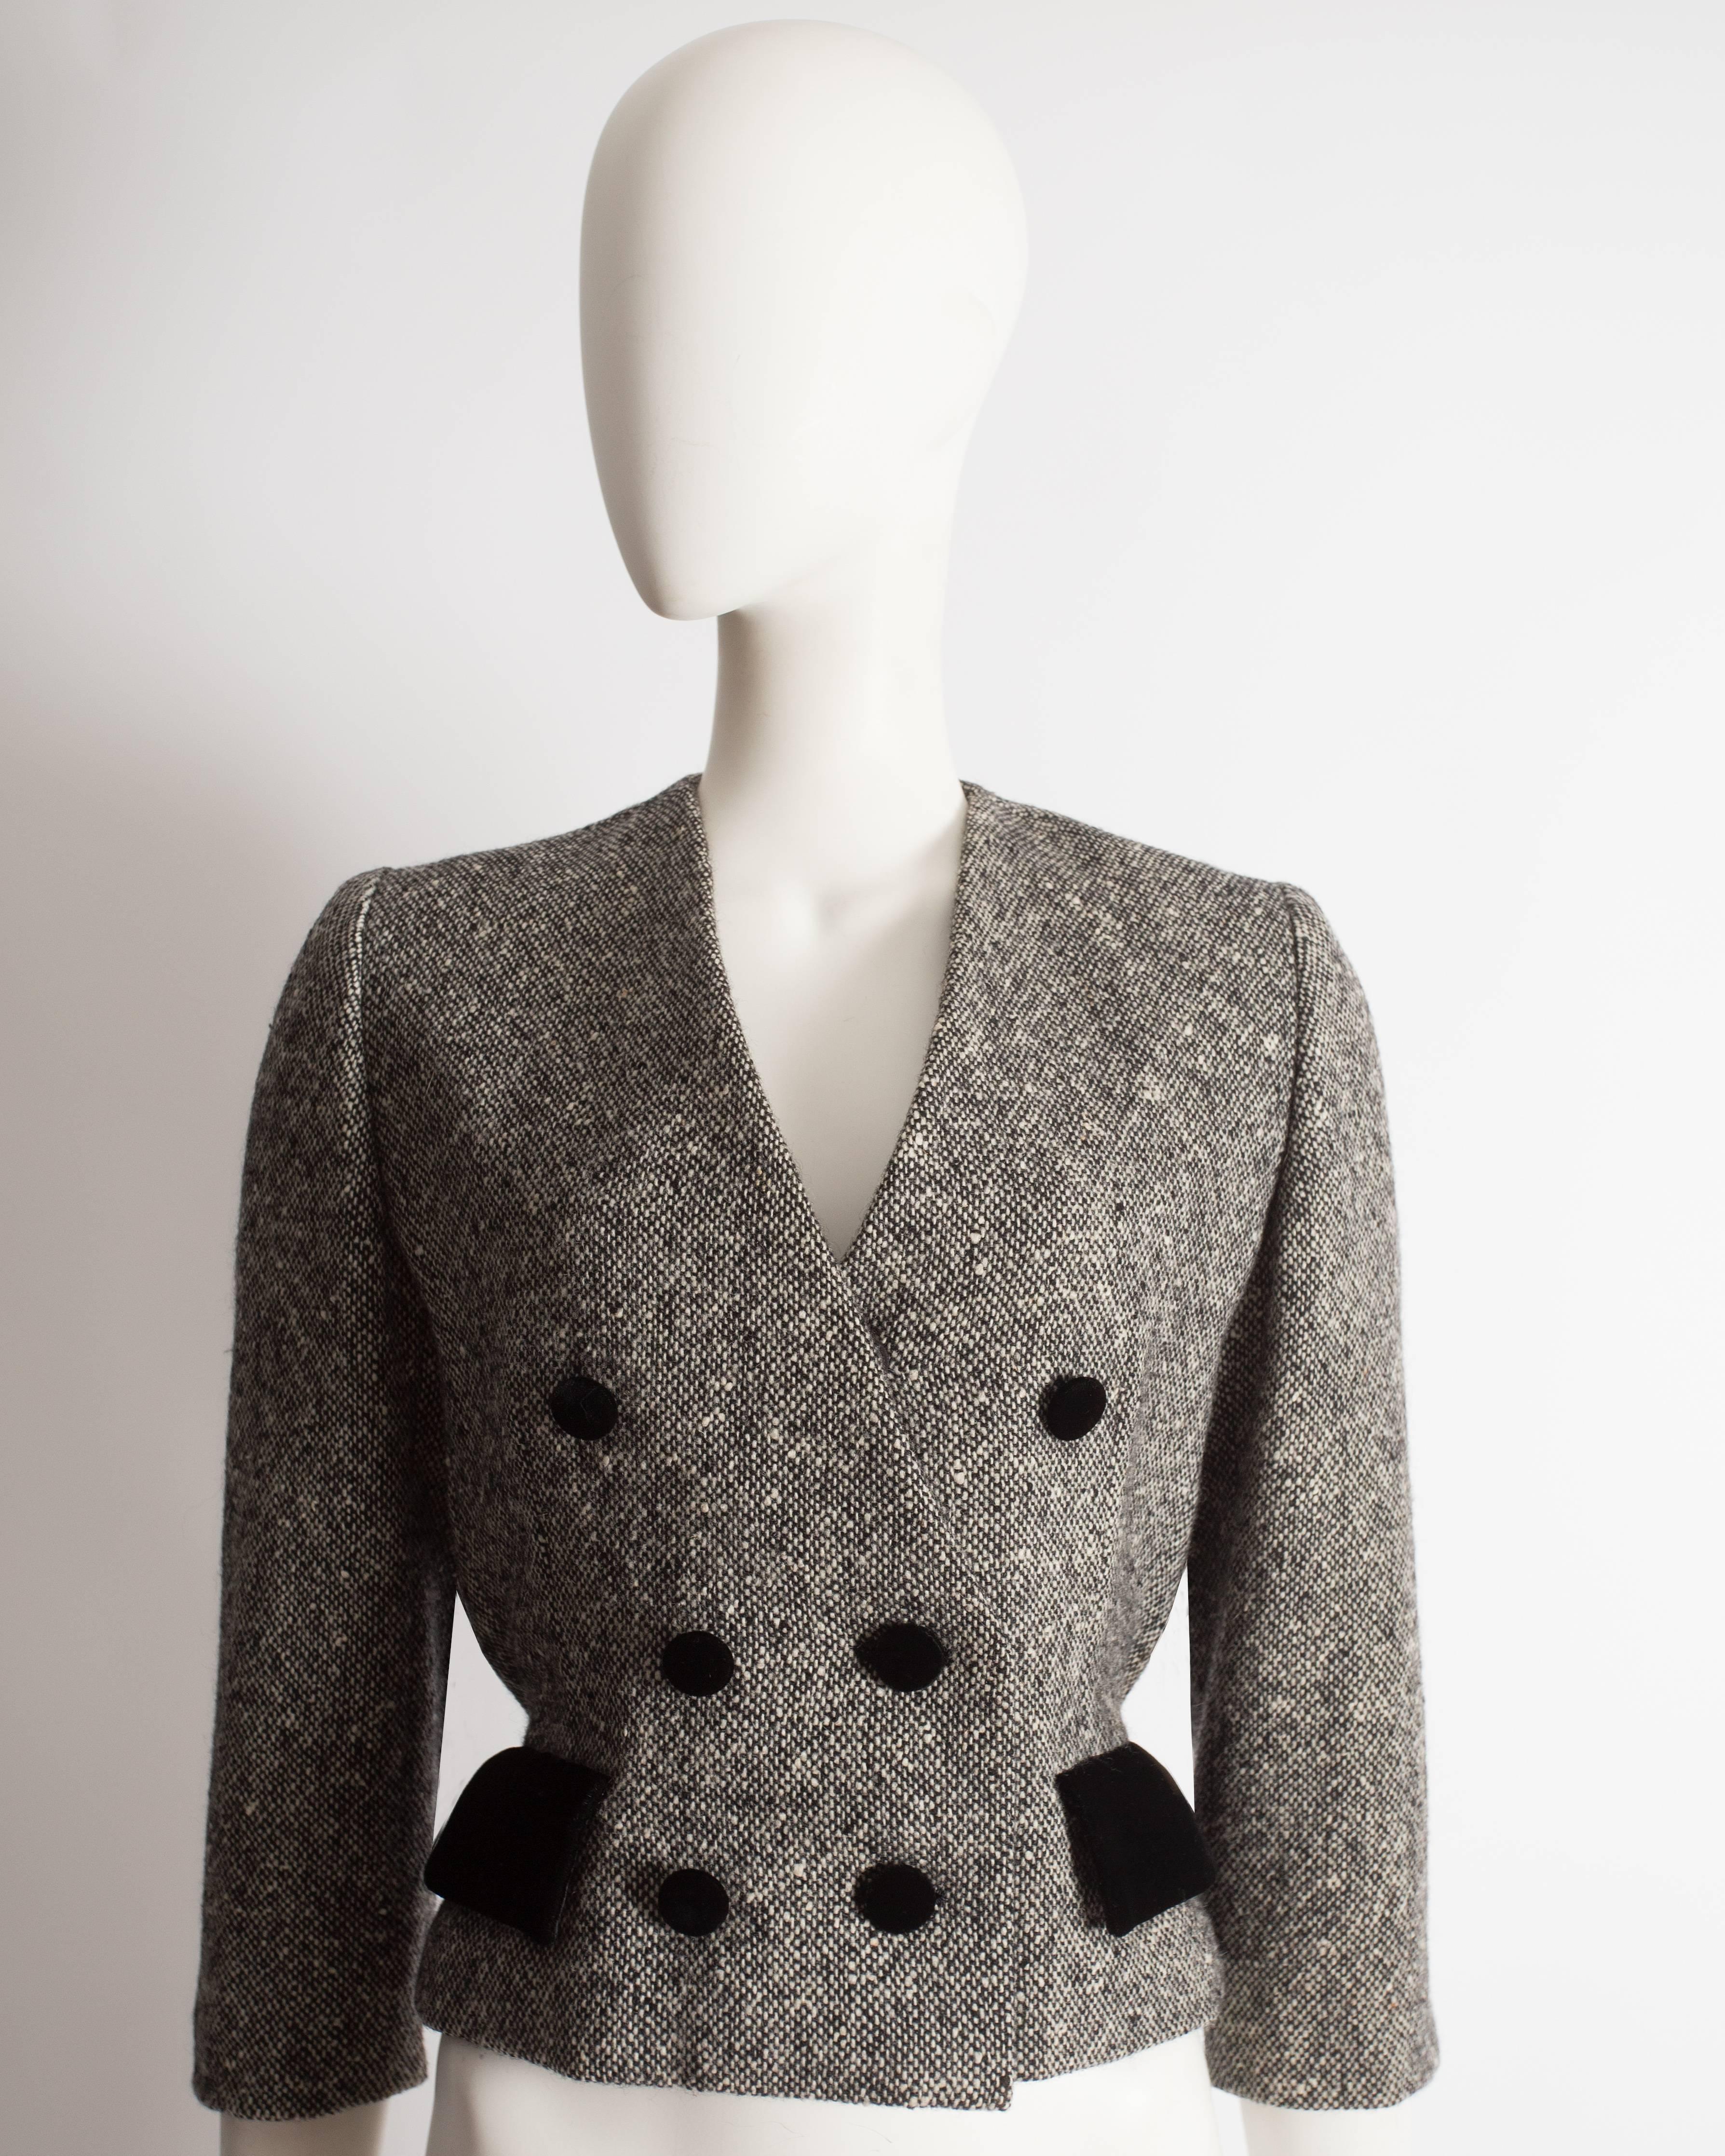 Fine and rare Haute Couture Christian Dior jacket constructed in grey tweed, 100% wool with black silk lining, silk velvet buttons and flap pockets, hidden snap button closures and pleated waistband at the rear. 

Circa 1950

Excellent condition